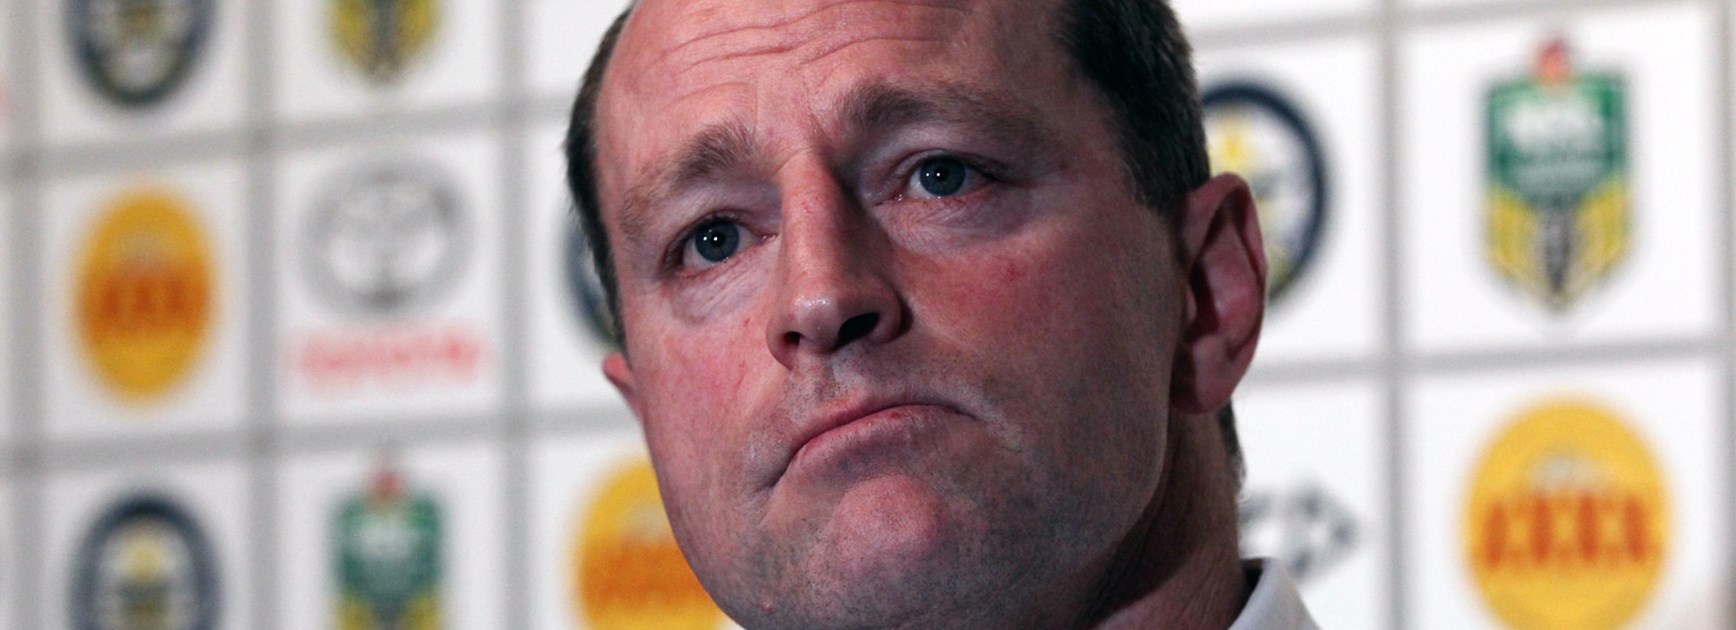 South Sydney coach Michael Maguire will join Roosters counterpart Trent Robinson as coaching representatives on the NRL Competition Committee.